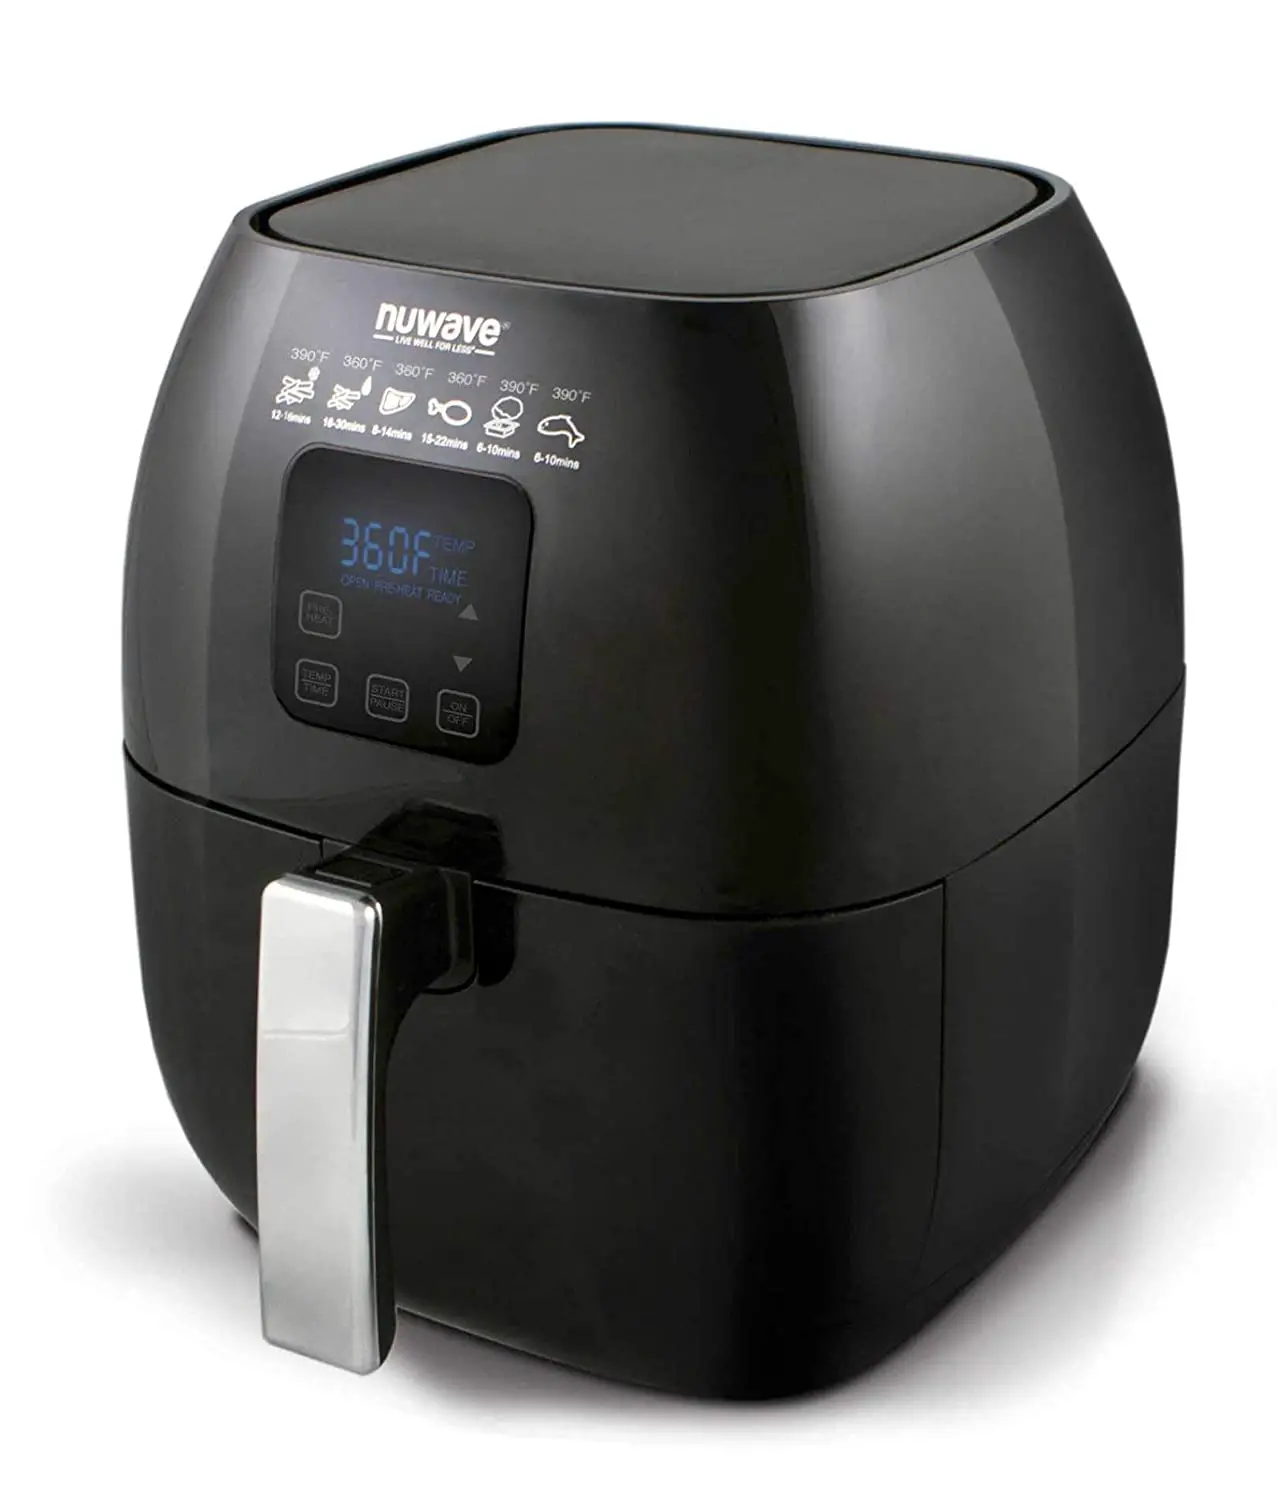 Which Is The Best Nuwave Bravo Xl Air Fryer Convection Oven As Seen On ...